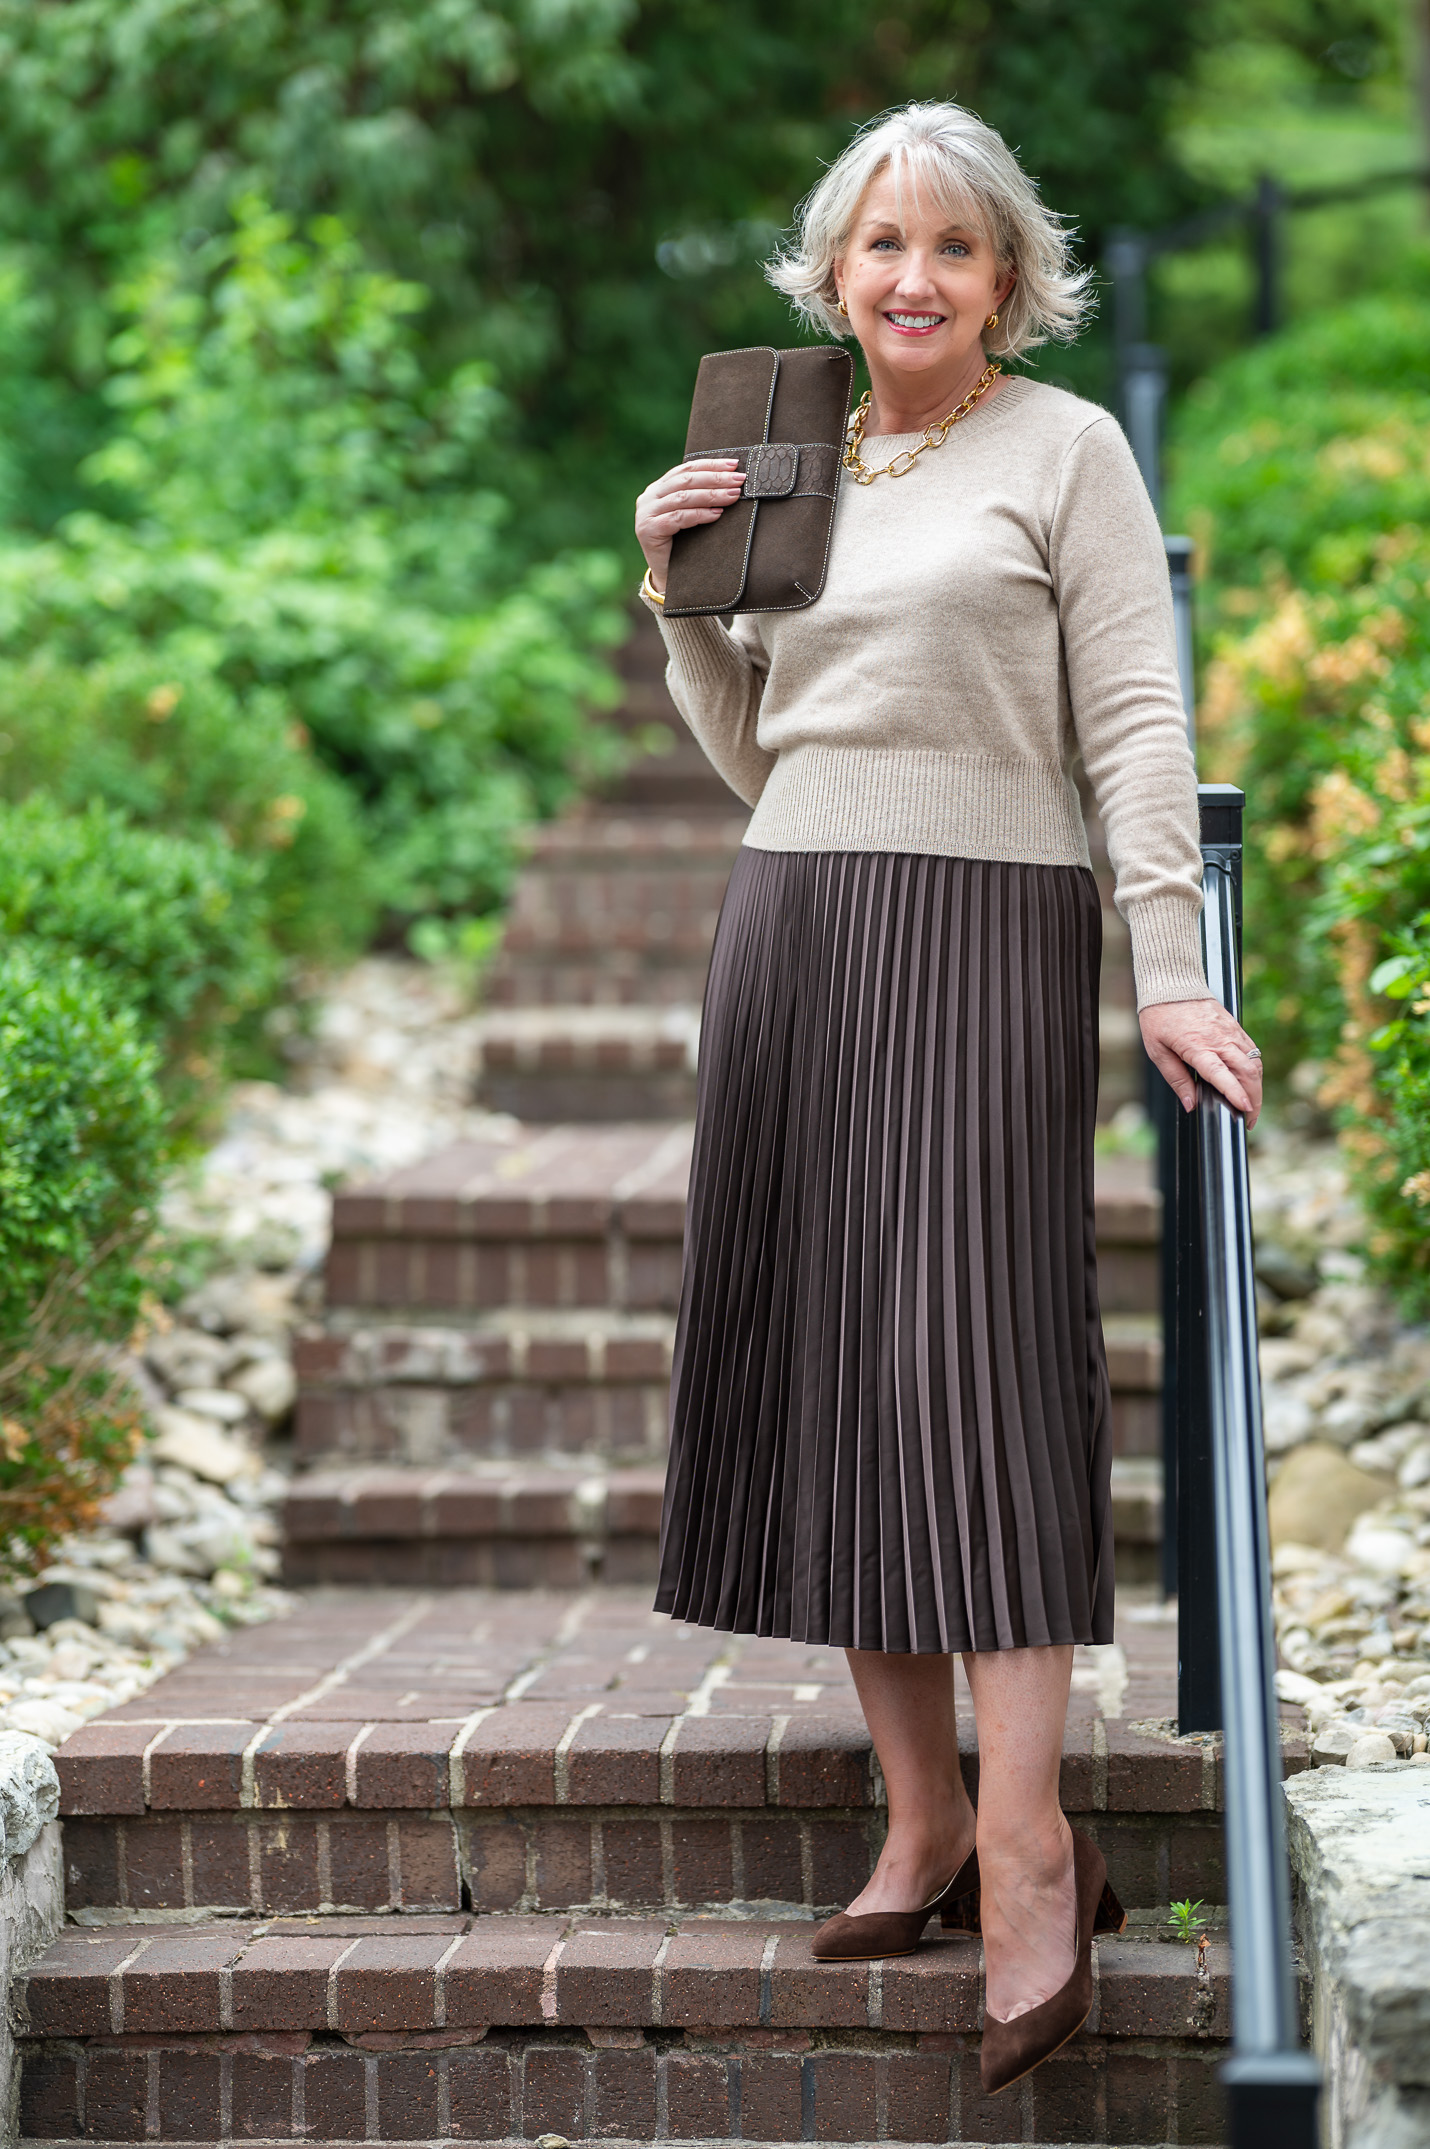 Styling a Pleated Midi Skirt 2 Ways for Fall